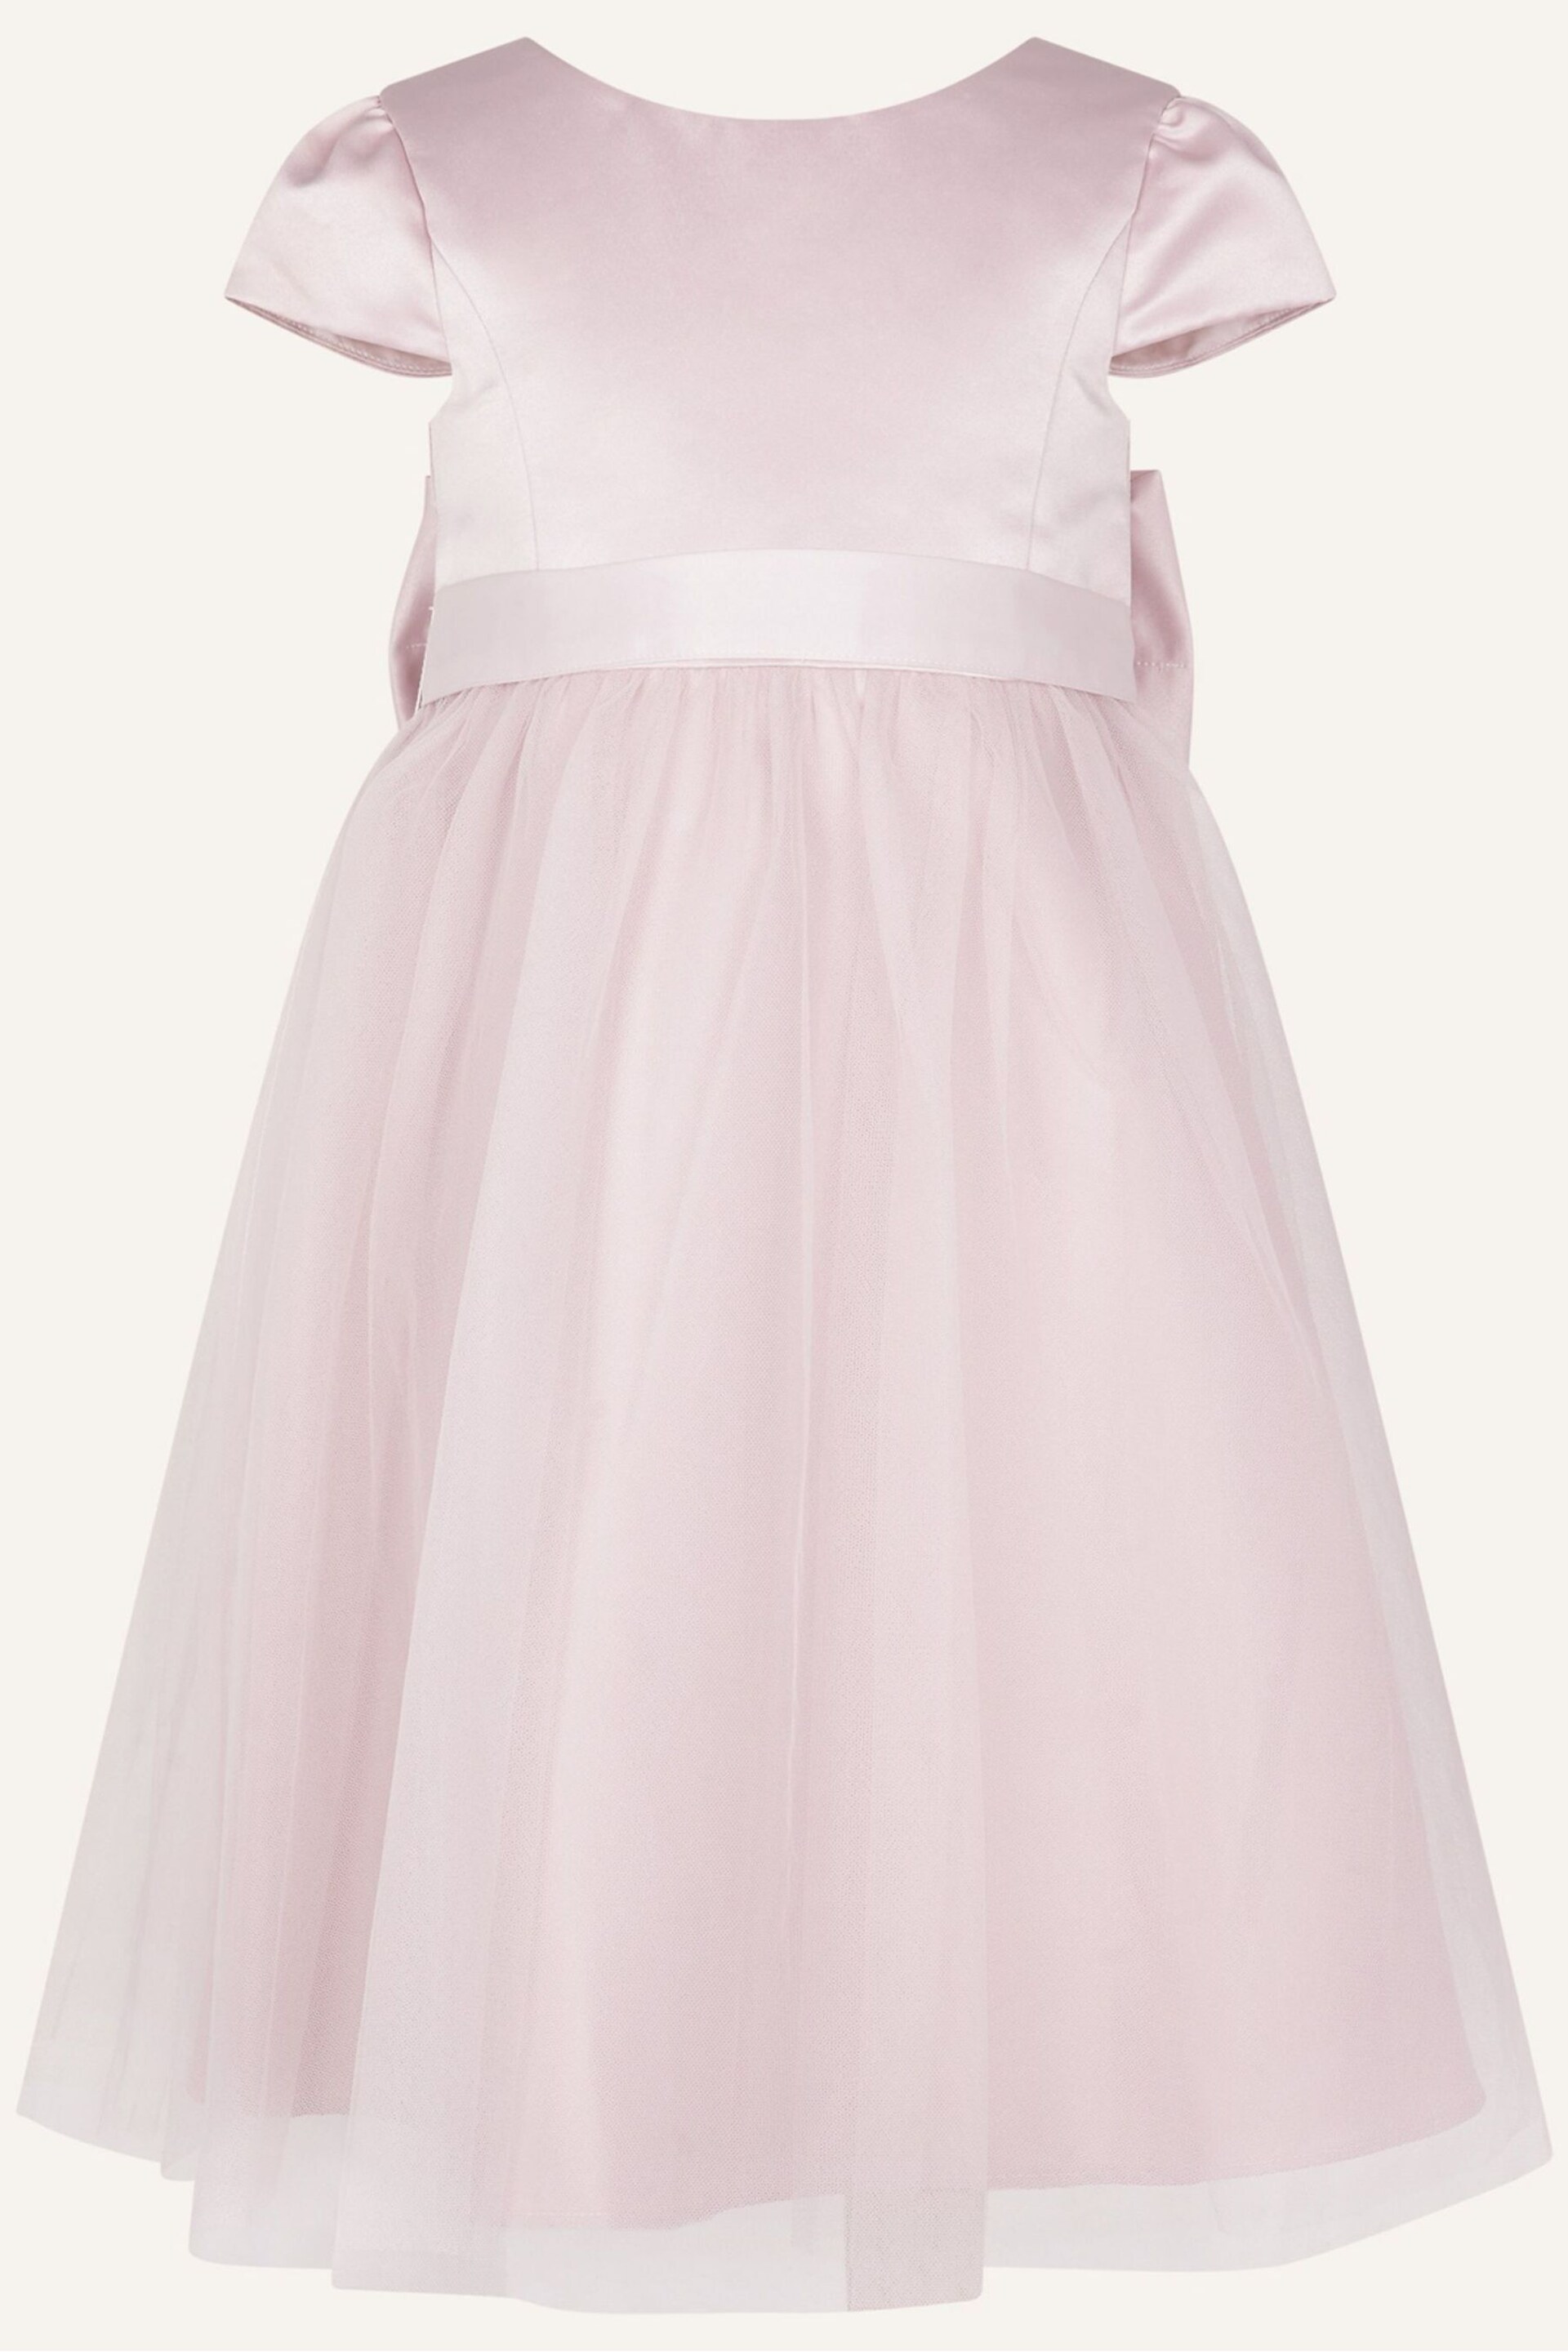 Monsoon Tulle Bridesmaid Bow Dress - Image 1 of 3